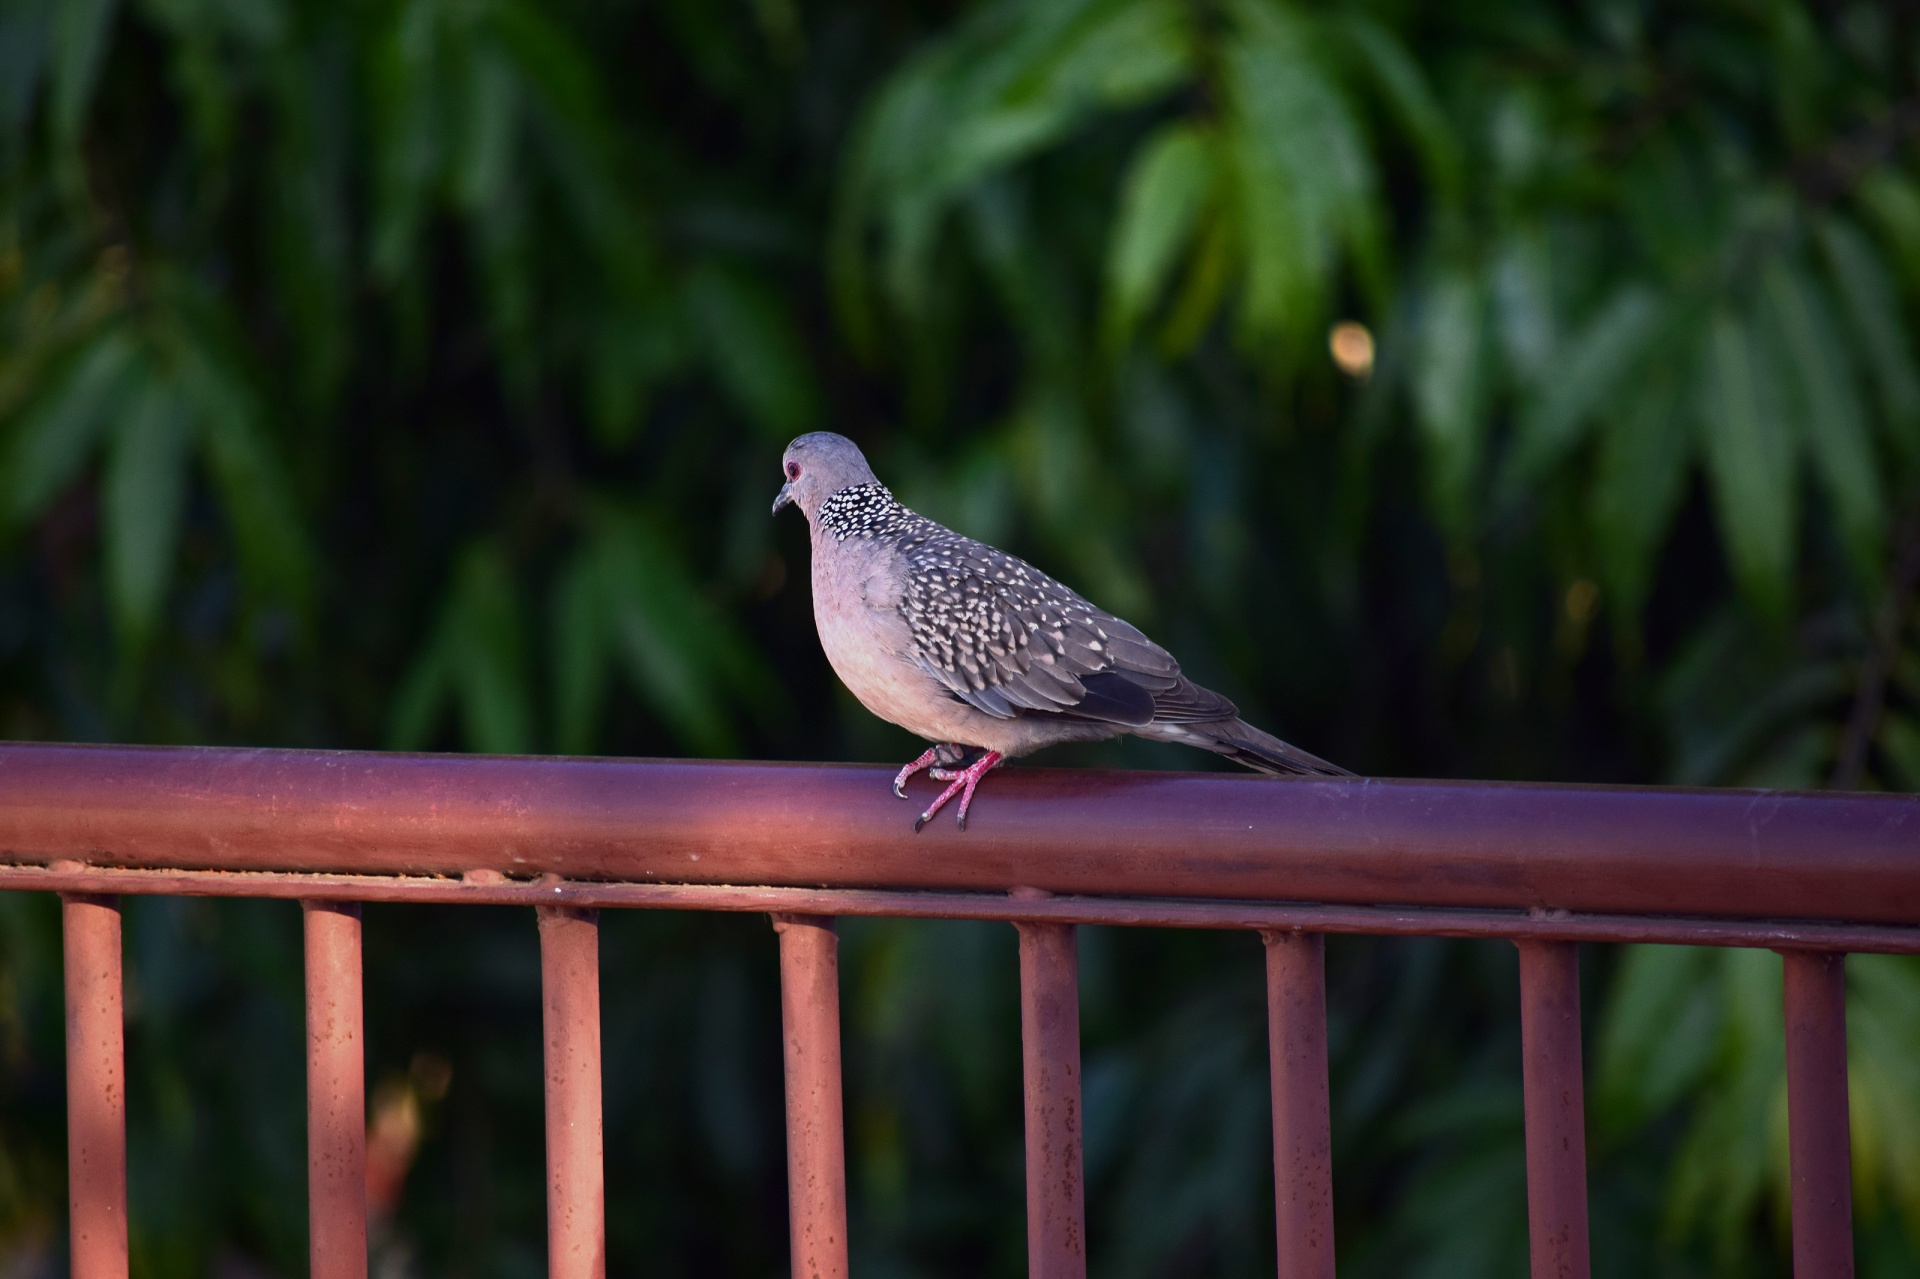 dove spotted bird free photo